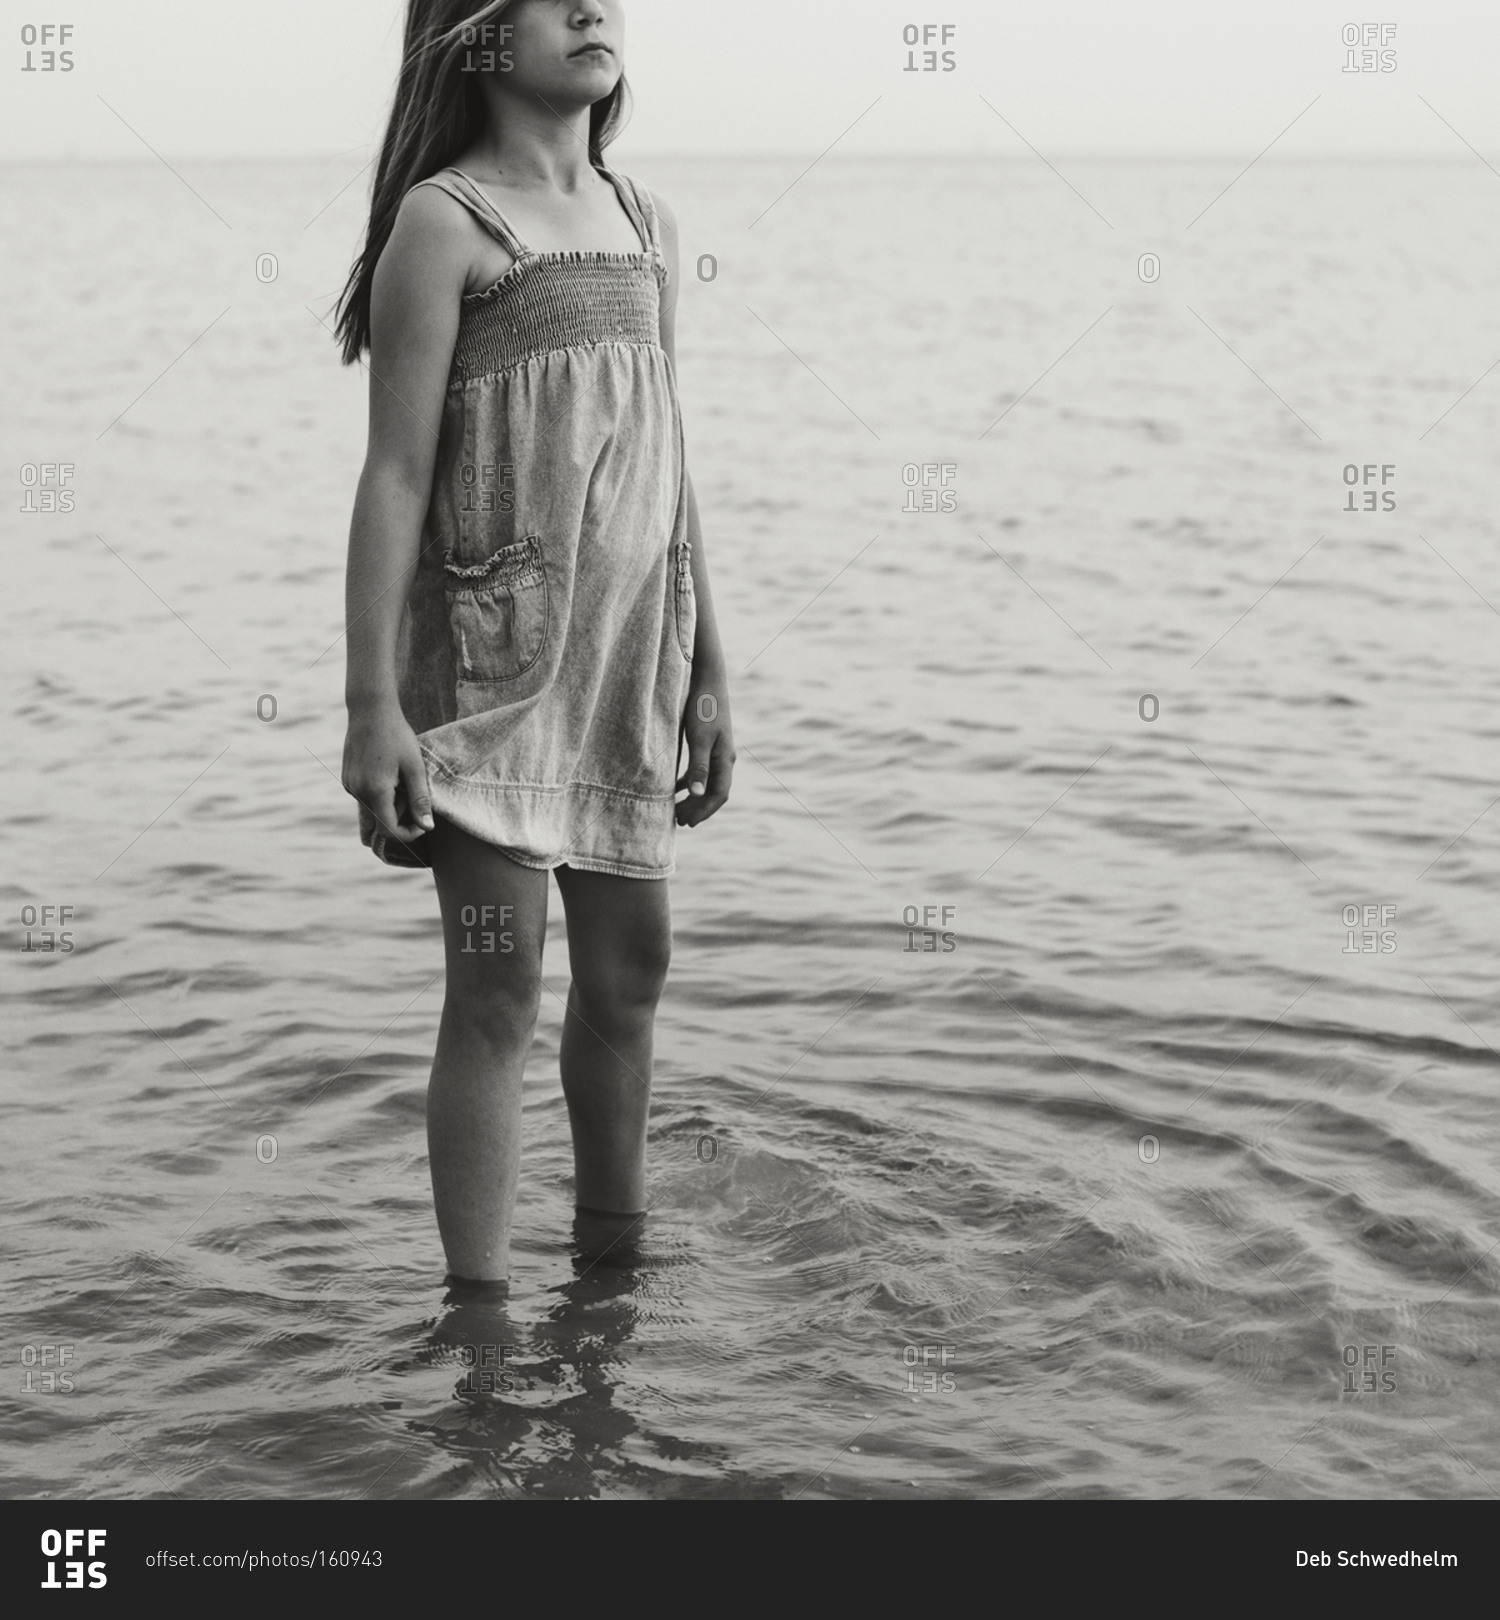 Girl standing in shallow water stock photo - OFFSET